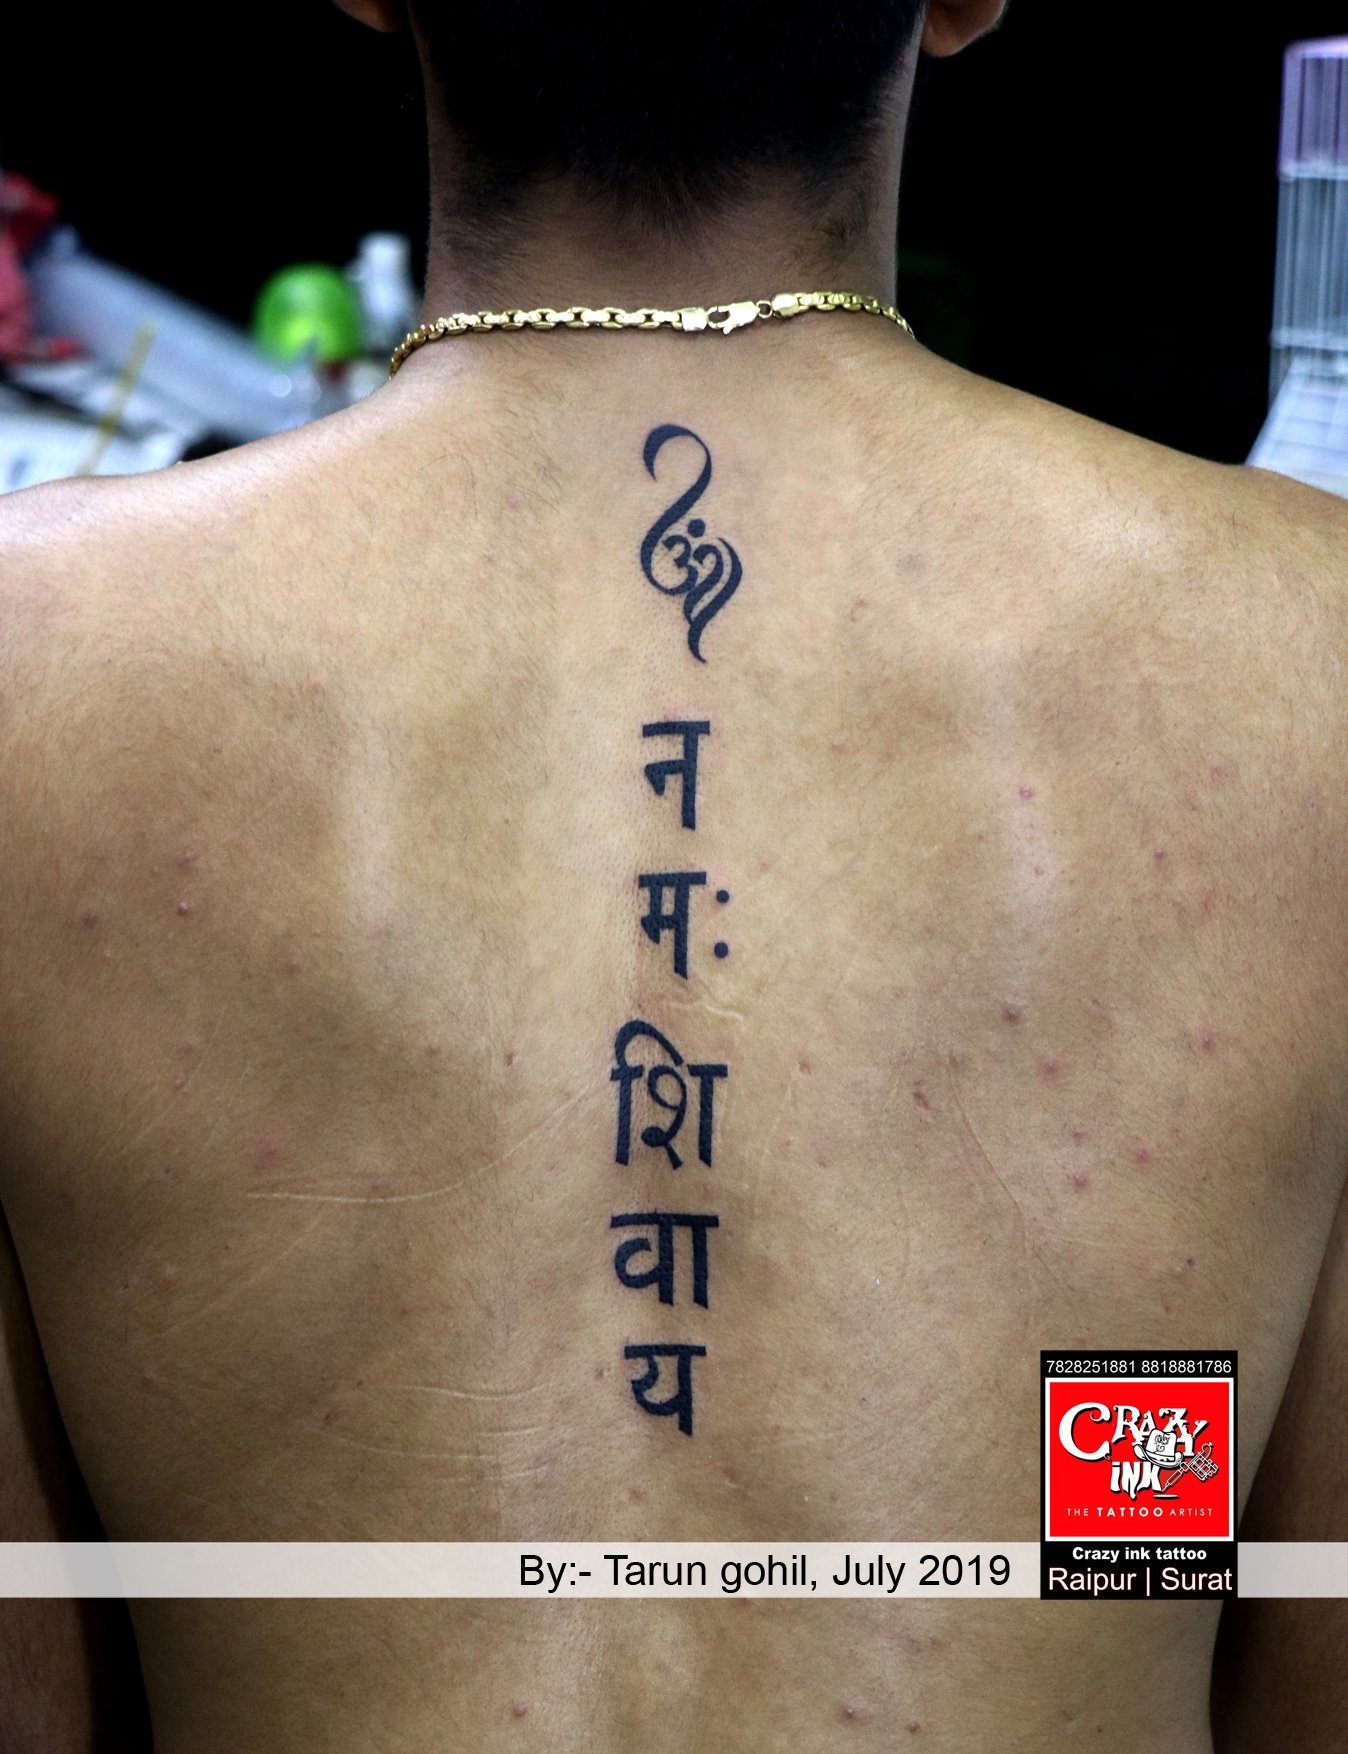 Religious tattoos the latest trend among young devotees this Shrawan   Allahabad News  Times of India